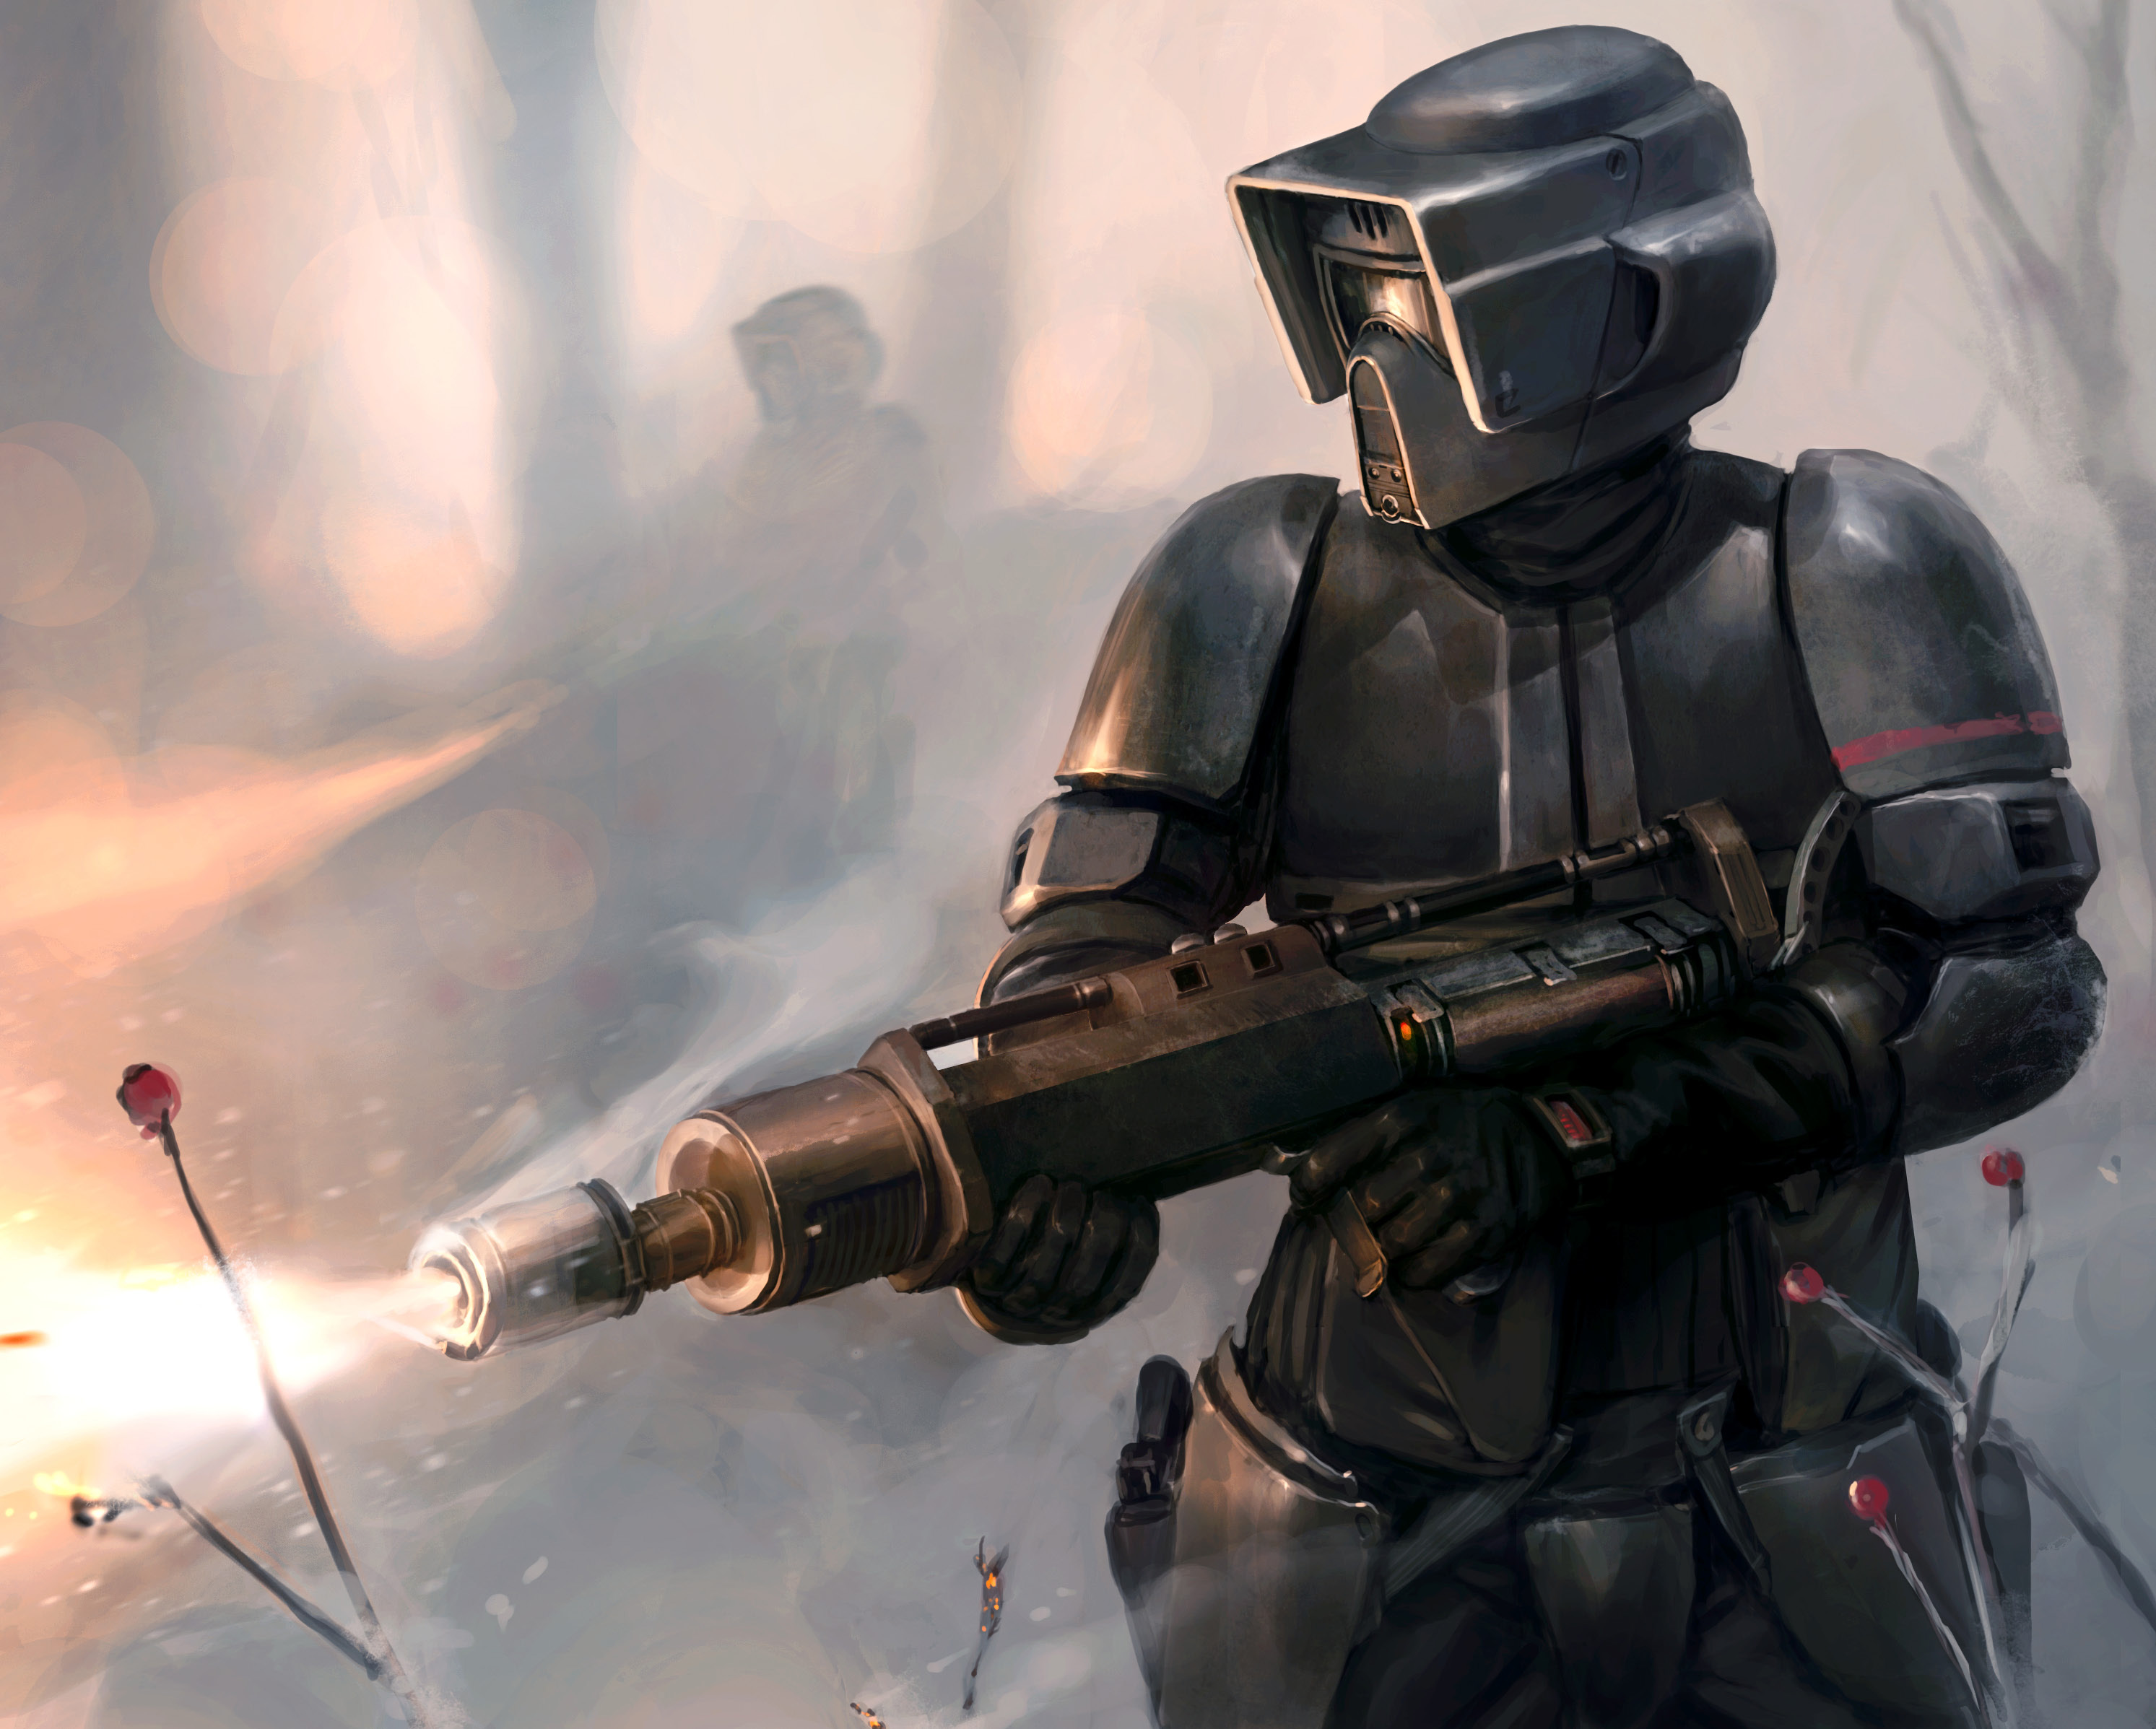 imperial scout trooper